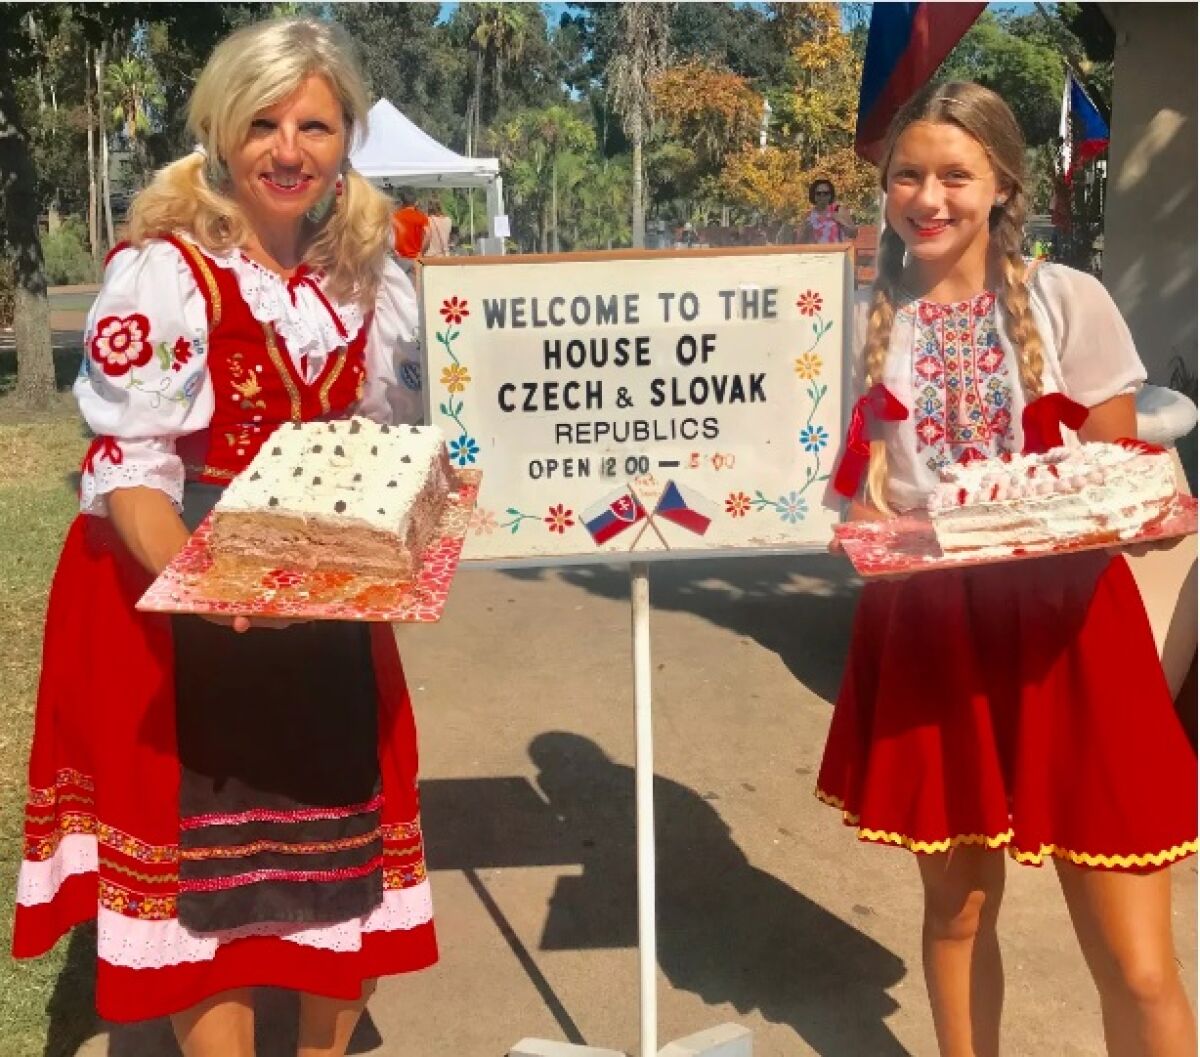 Point Loma resident Marketa Hancova and her daughter, Adelka, volunteer at the Czech House at San Diego’s Balboa Park.